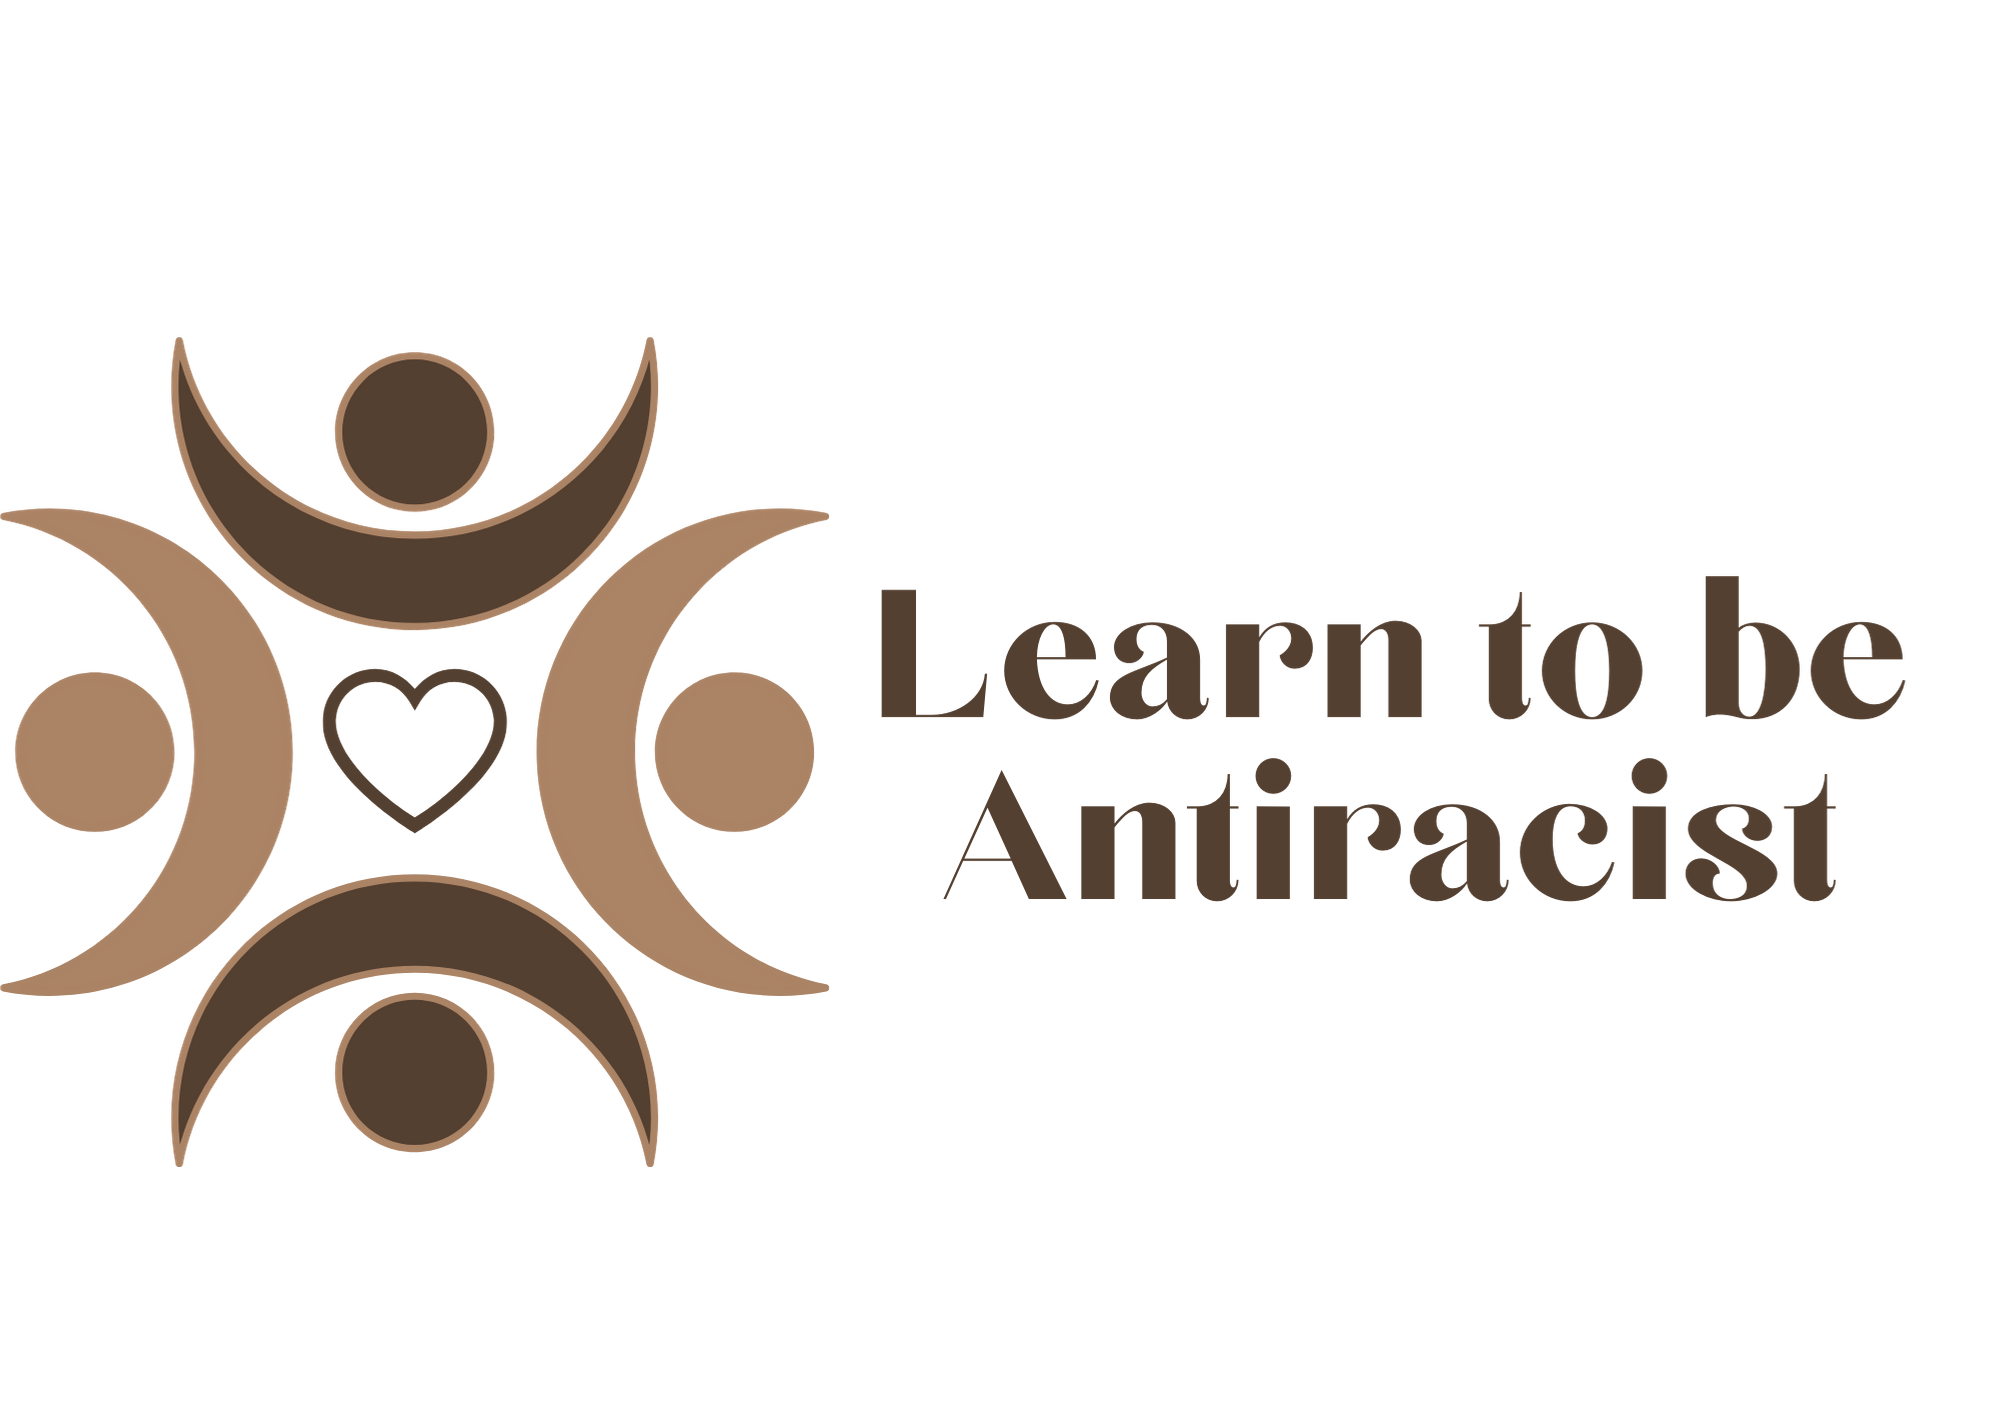 Learn to be Antiracist